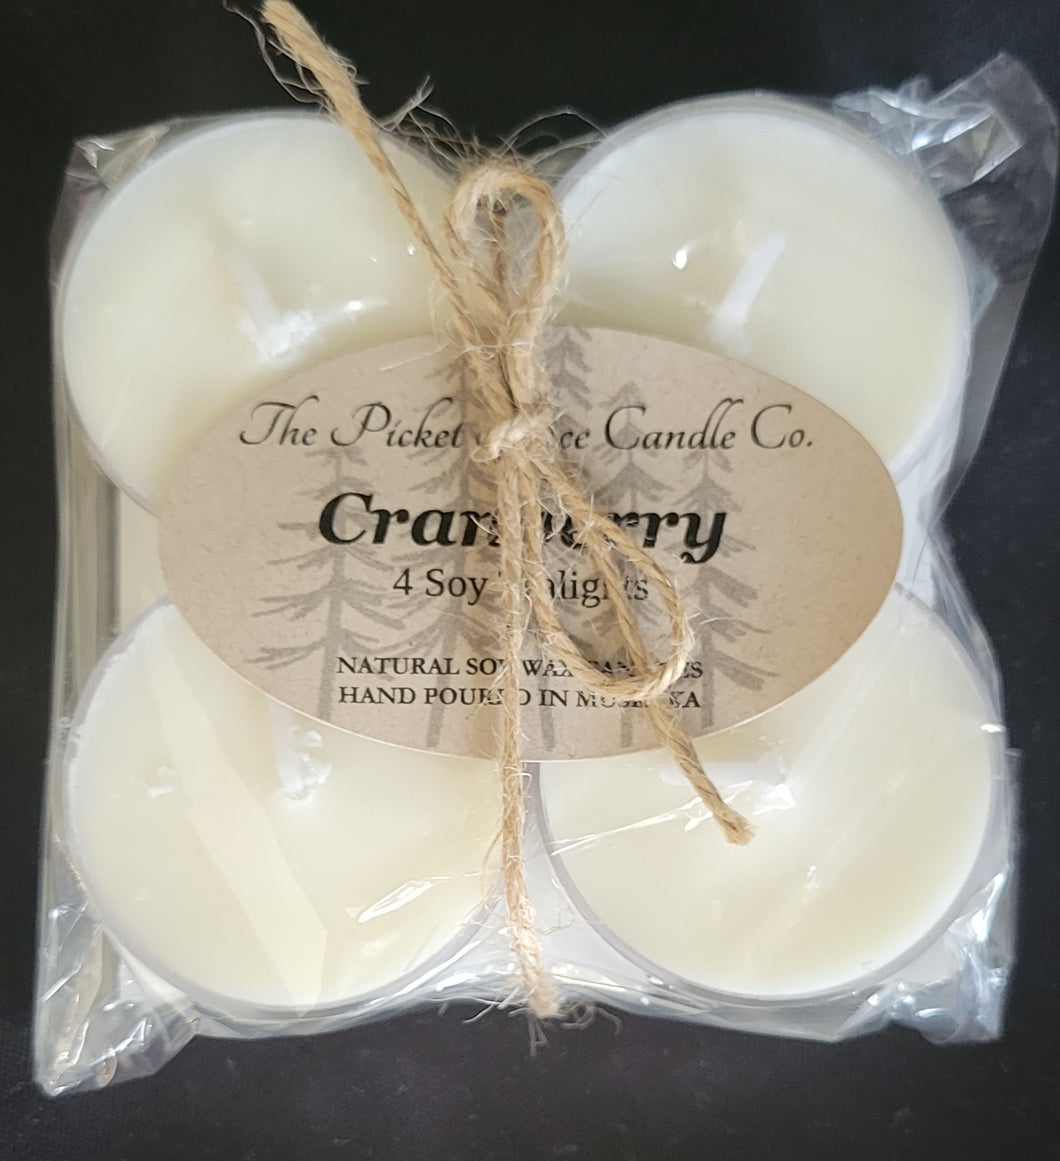 Cranberry Scented Tealight Candles From The Picket Fence Candle Co.  Made in Muskoka, Canada